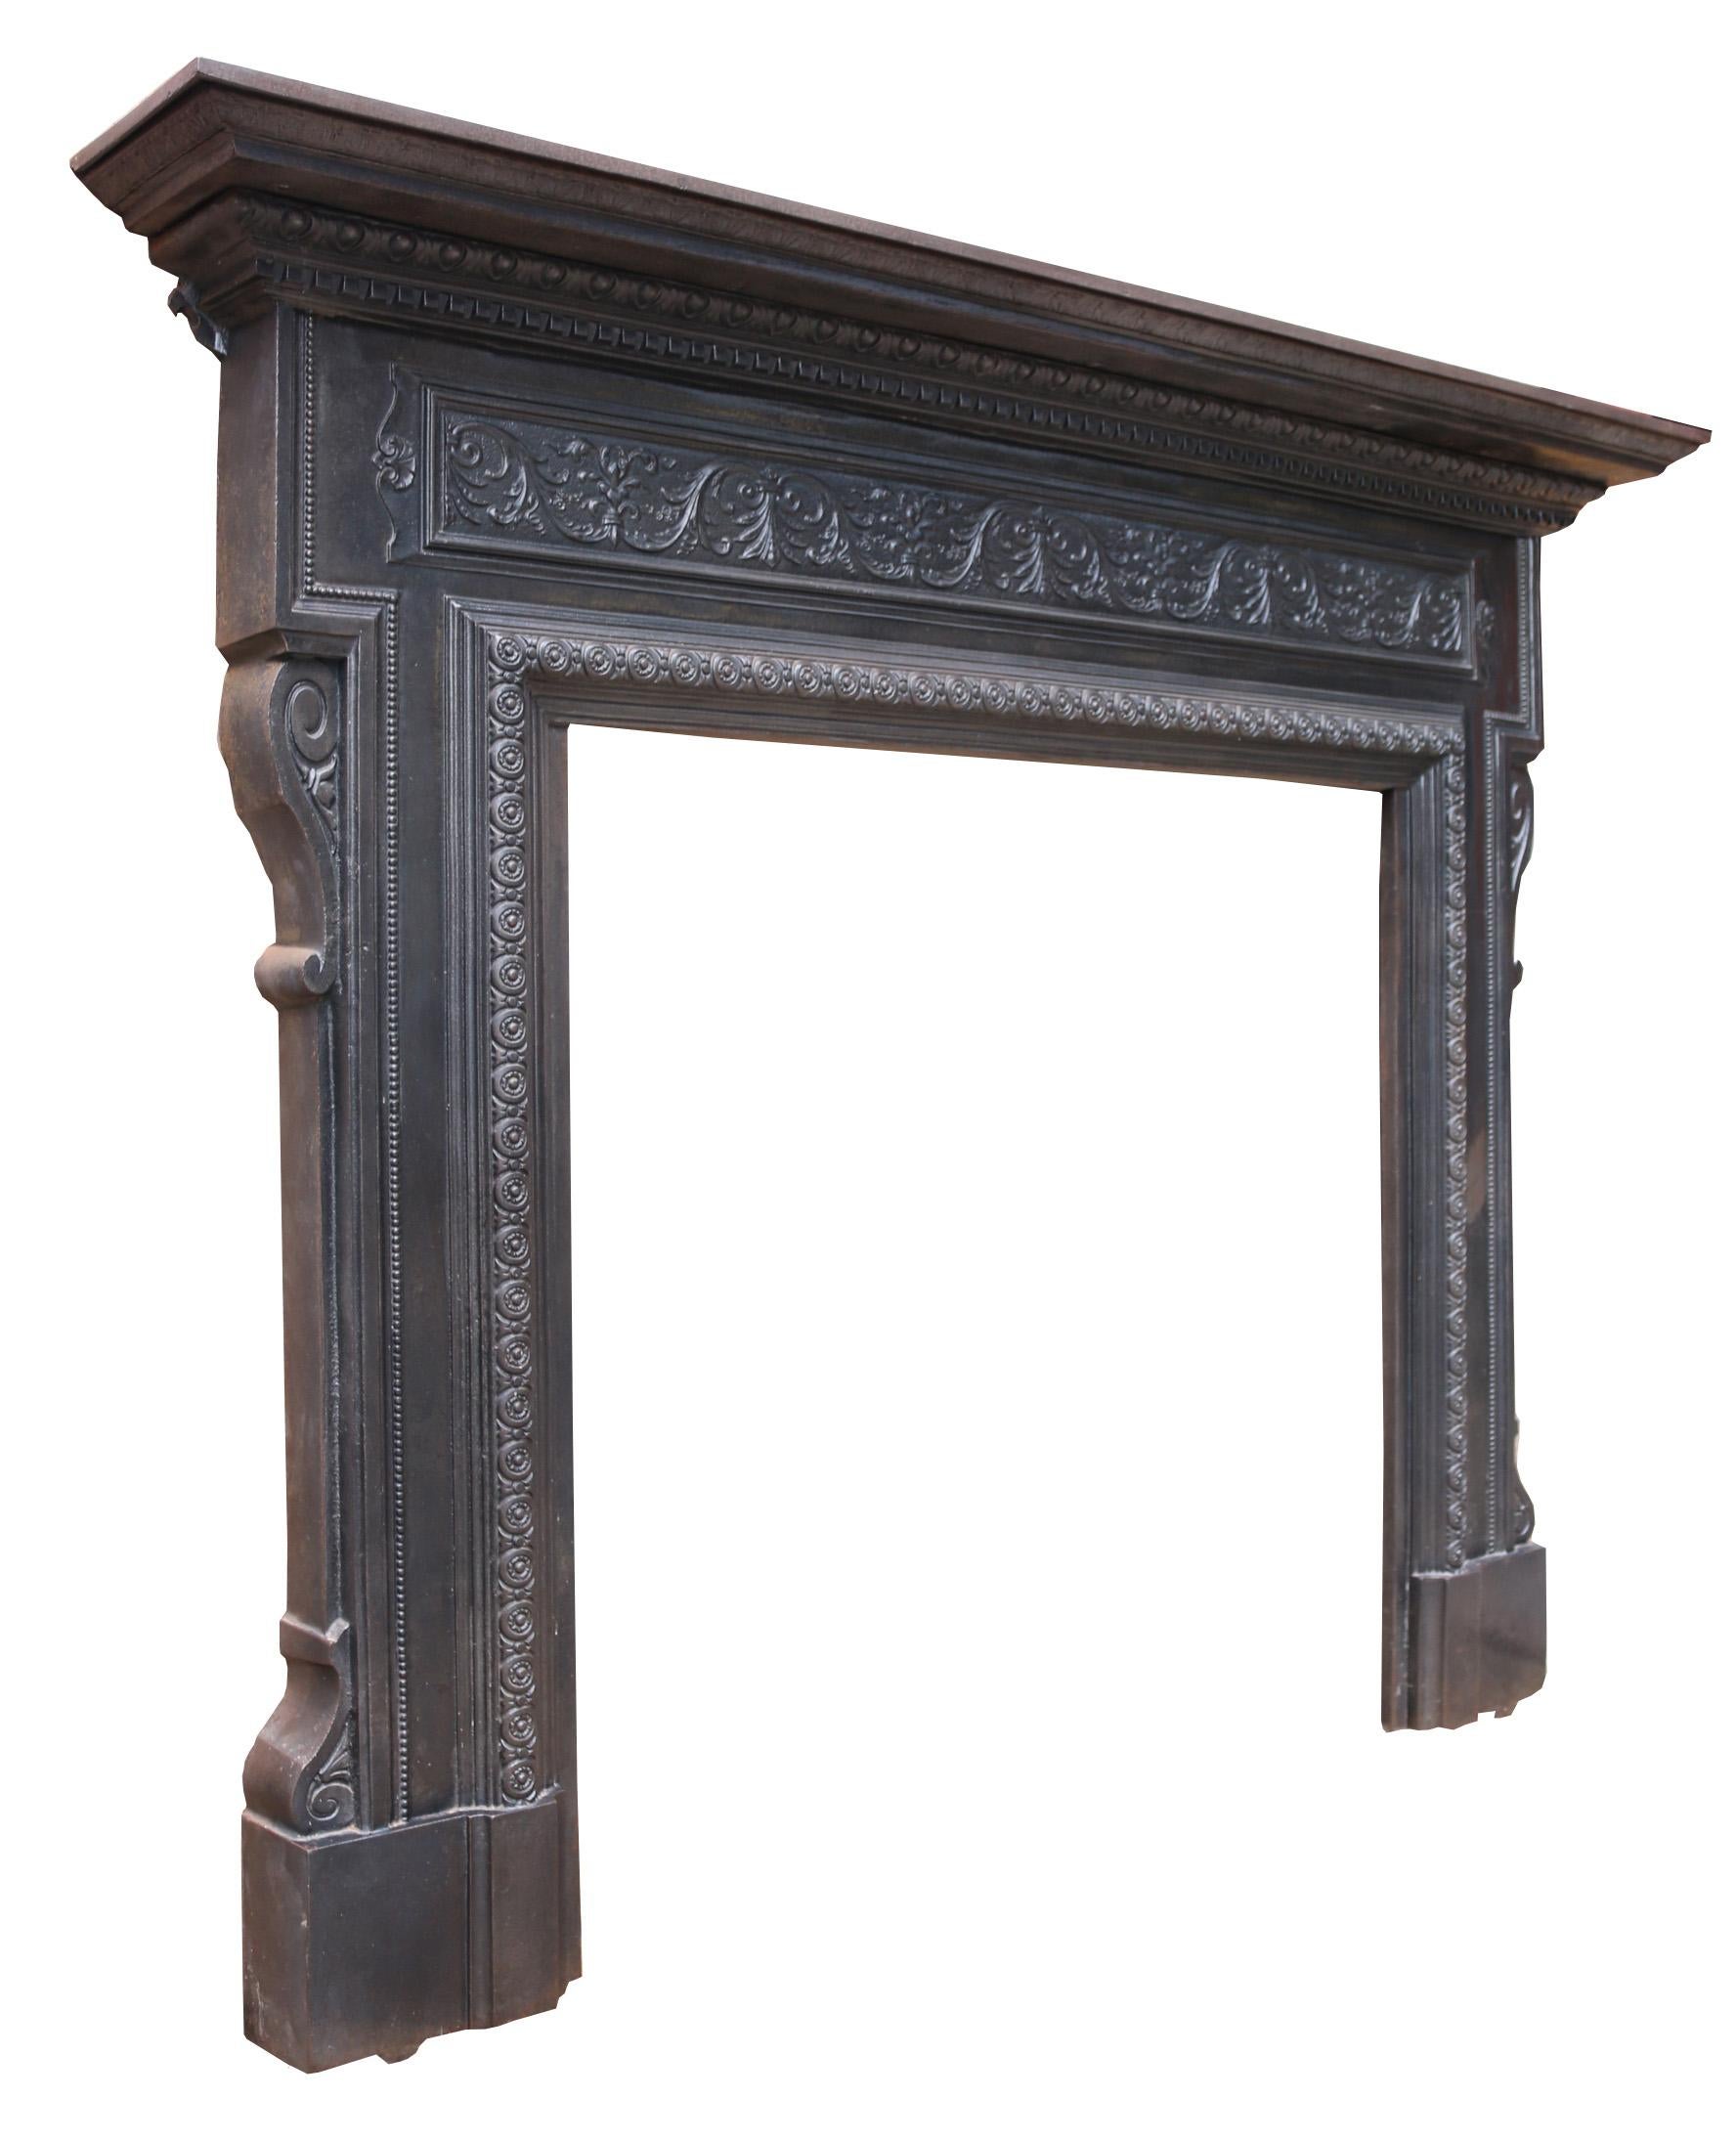 Victorian cast iron fire surround decorated in the Adam style.

Reclaimed from a house in Kensington, London.

Measures: Height 136 cm

Width 169.5 cm

Depth 23 cm

Opening height 97 cm

Opening width 96.5 cm

Width between legs 146